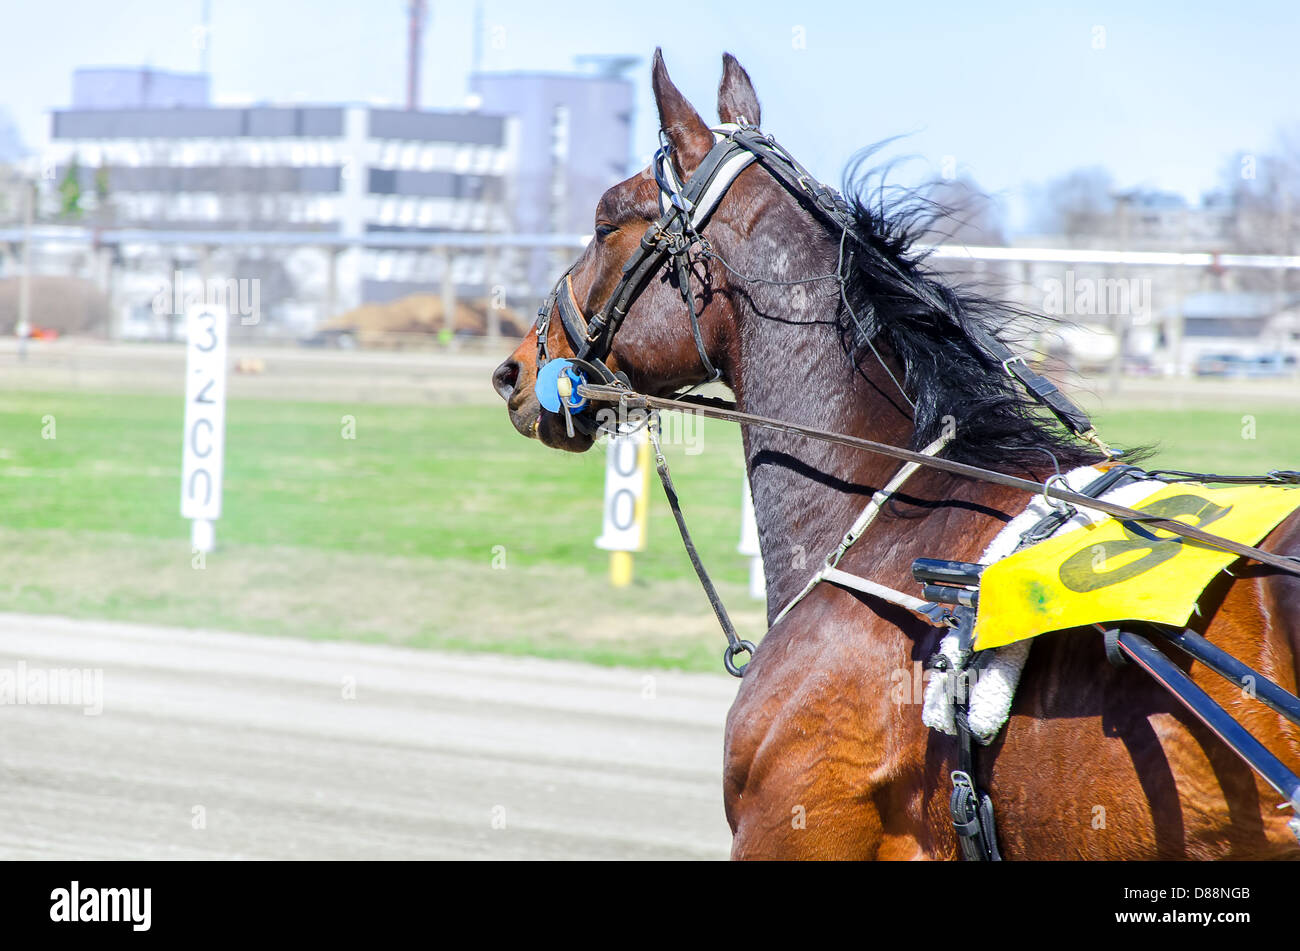 Harness racing. Racing horse in motion Stock Photo